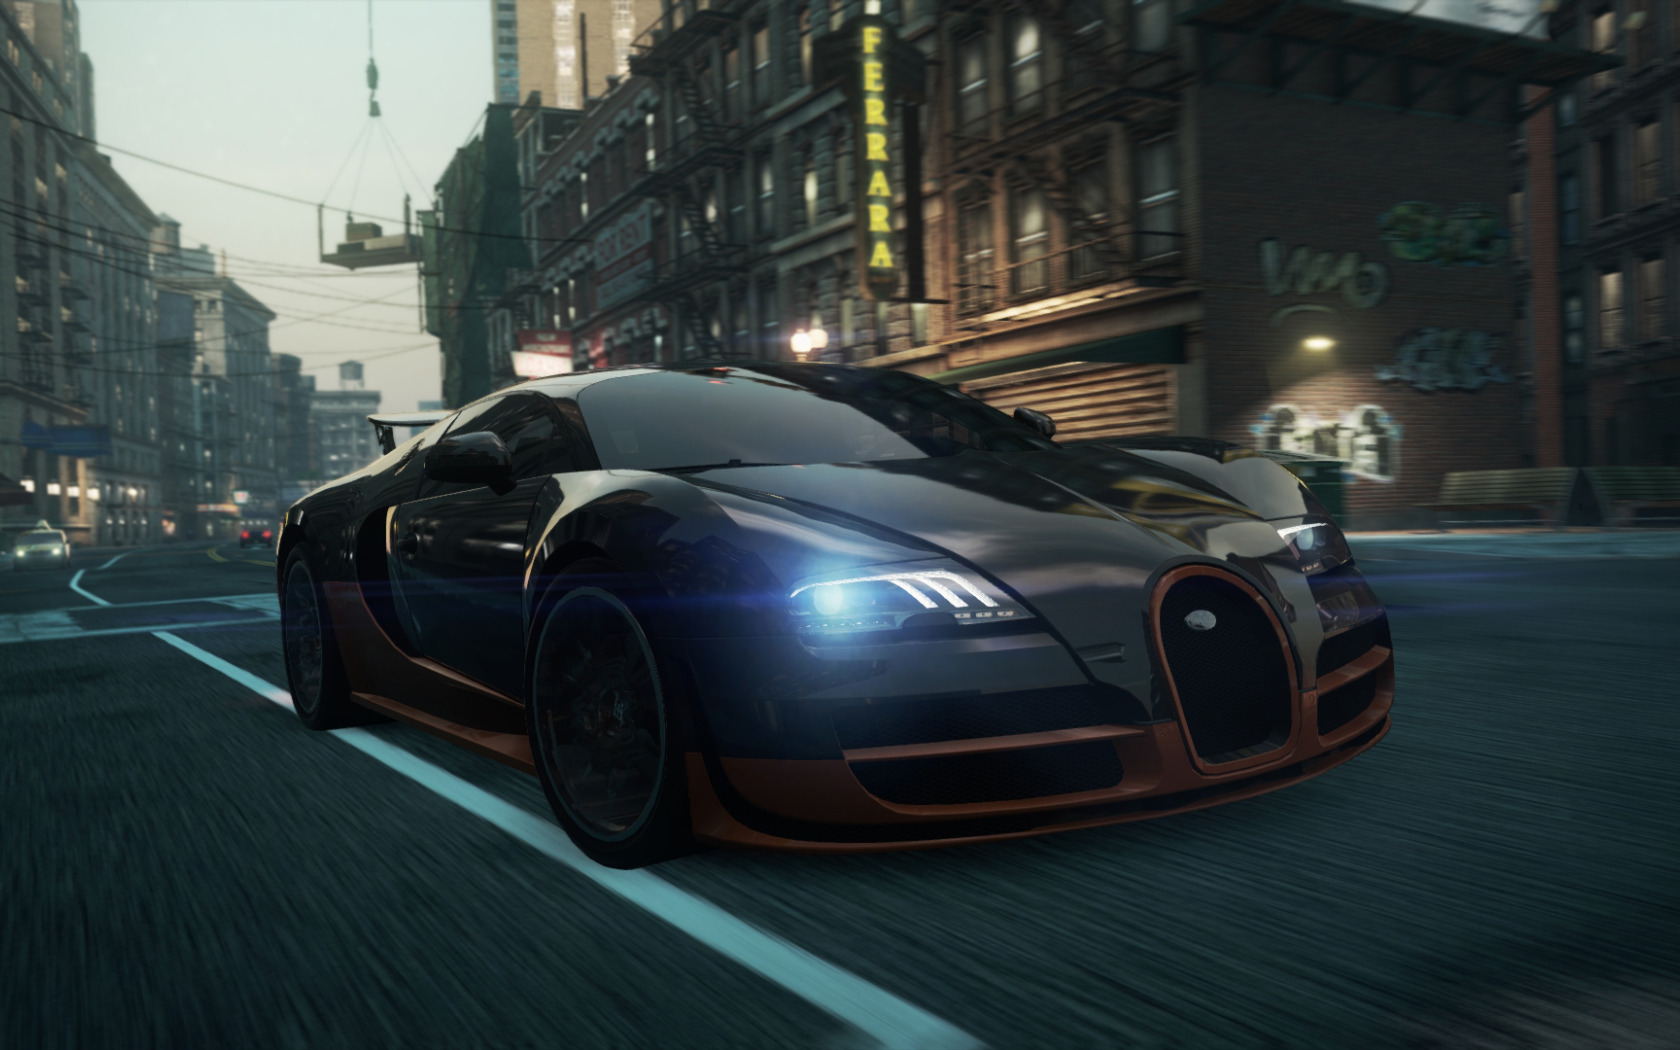 Need for Speed most wanted 2012. Бугатти Вейрон в most wanted 2012. Нед фор СПИД мост вантед 2012. Need for Speed most wanted 2012 Bugatti Veyron super Sport.